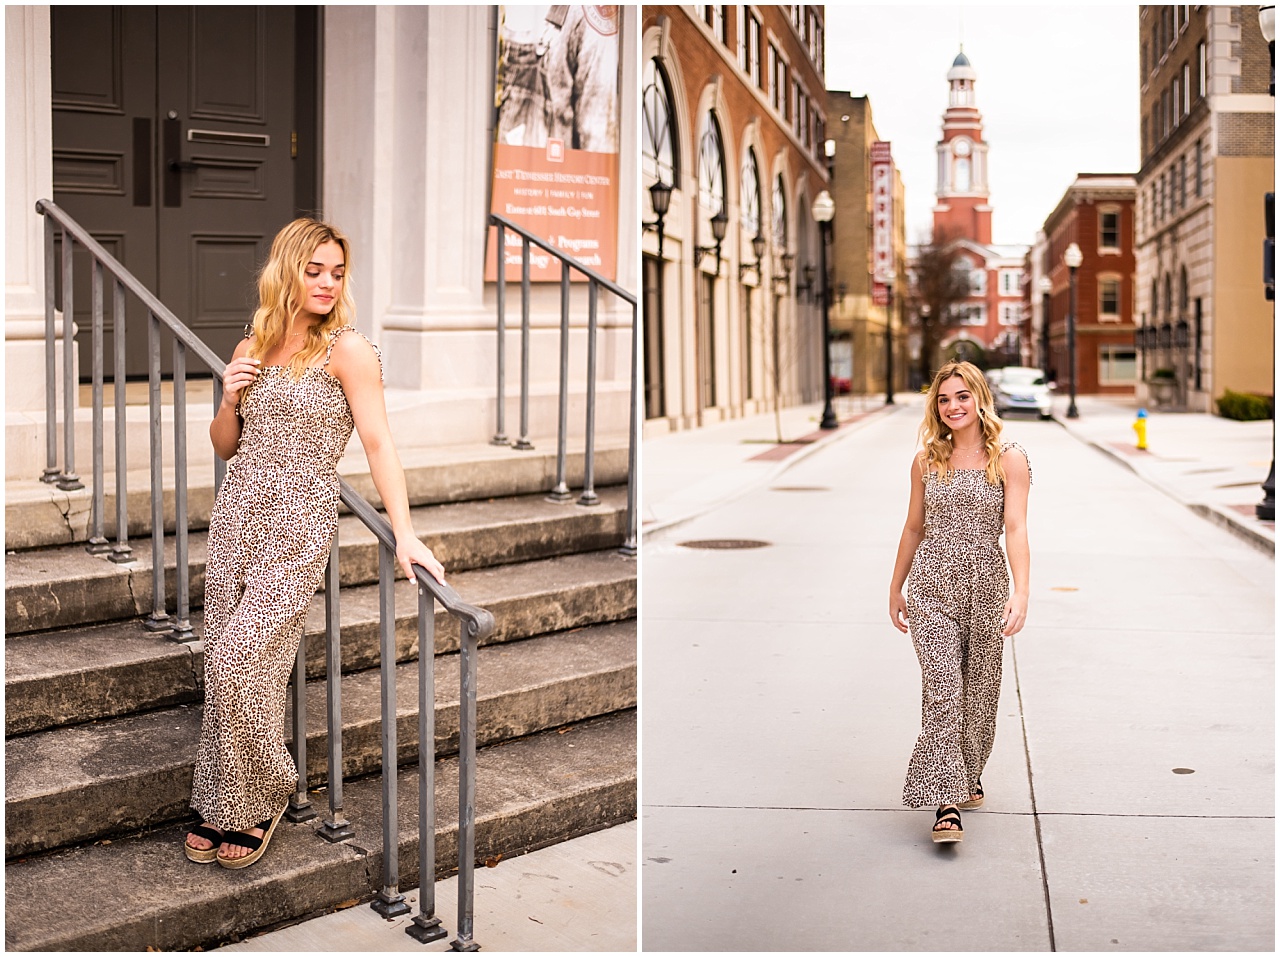 Blonde girl wearing leopard jumpsuit in sitting on sidewalk and standing in street in downtown Knoxville, Tennessee.